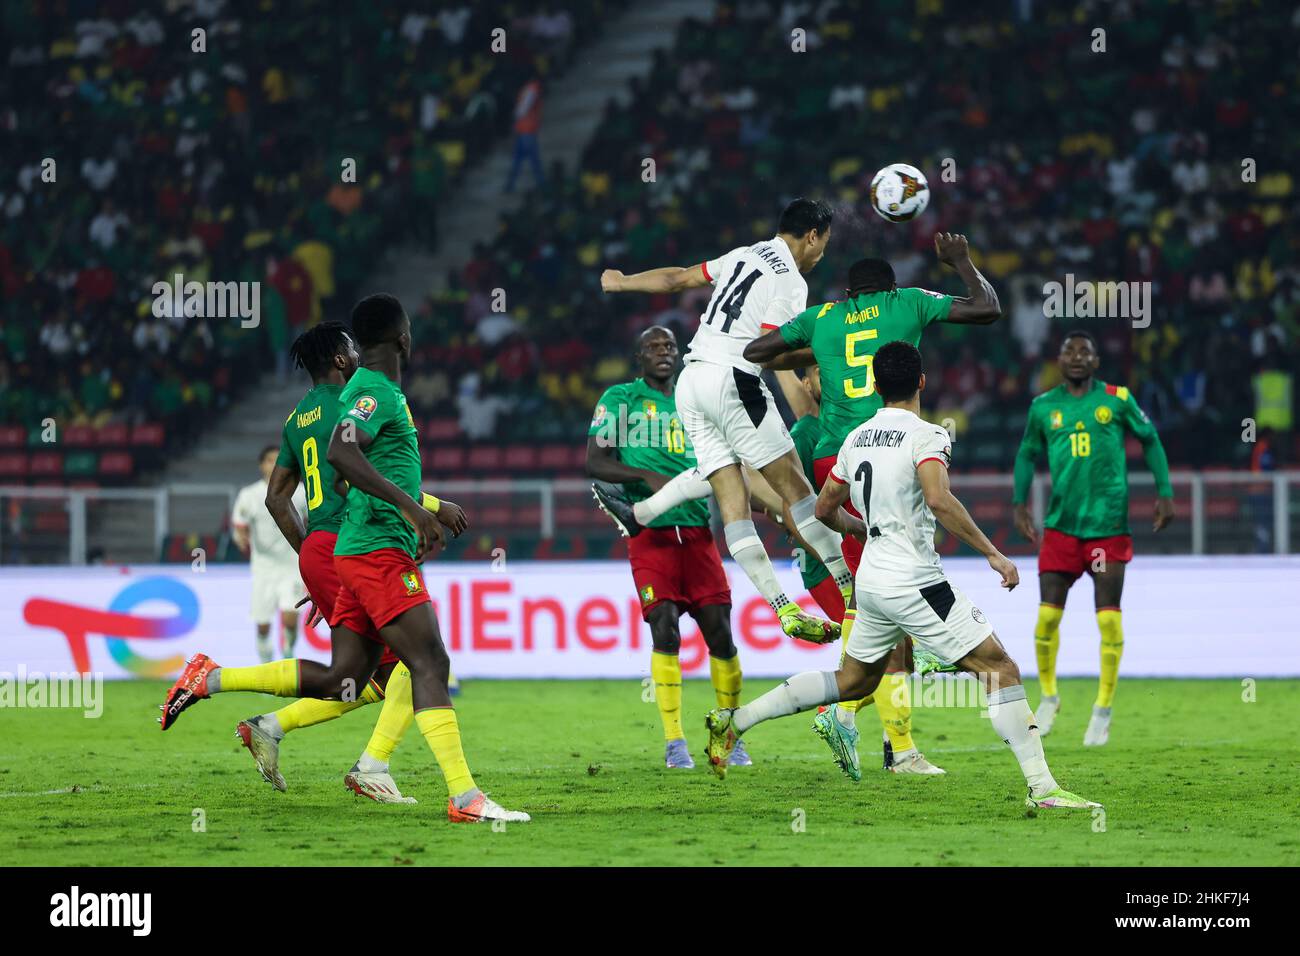 CAMEROON, Yaounde, 03 February 2022 - Mostafa Mohamed of Egypt during the Africa Cup of Nations play offs semi final match between Cameroon and Egypt at Stade d'Olembe, Yaounde, Cameroon, 03/02/2022/ Photo by SF Credit: Sebo47/Alamy Live News Stock Photo